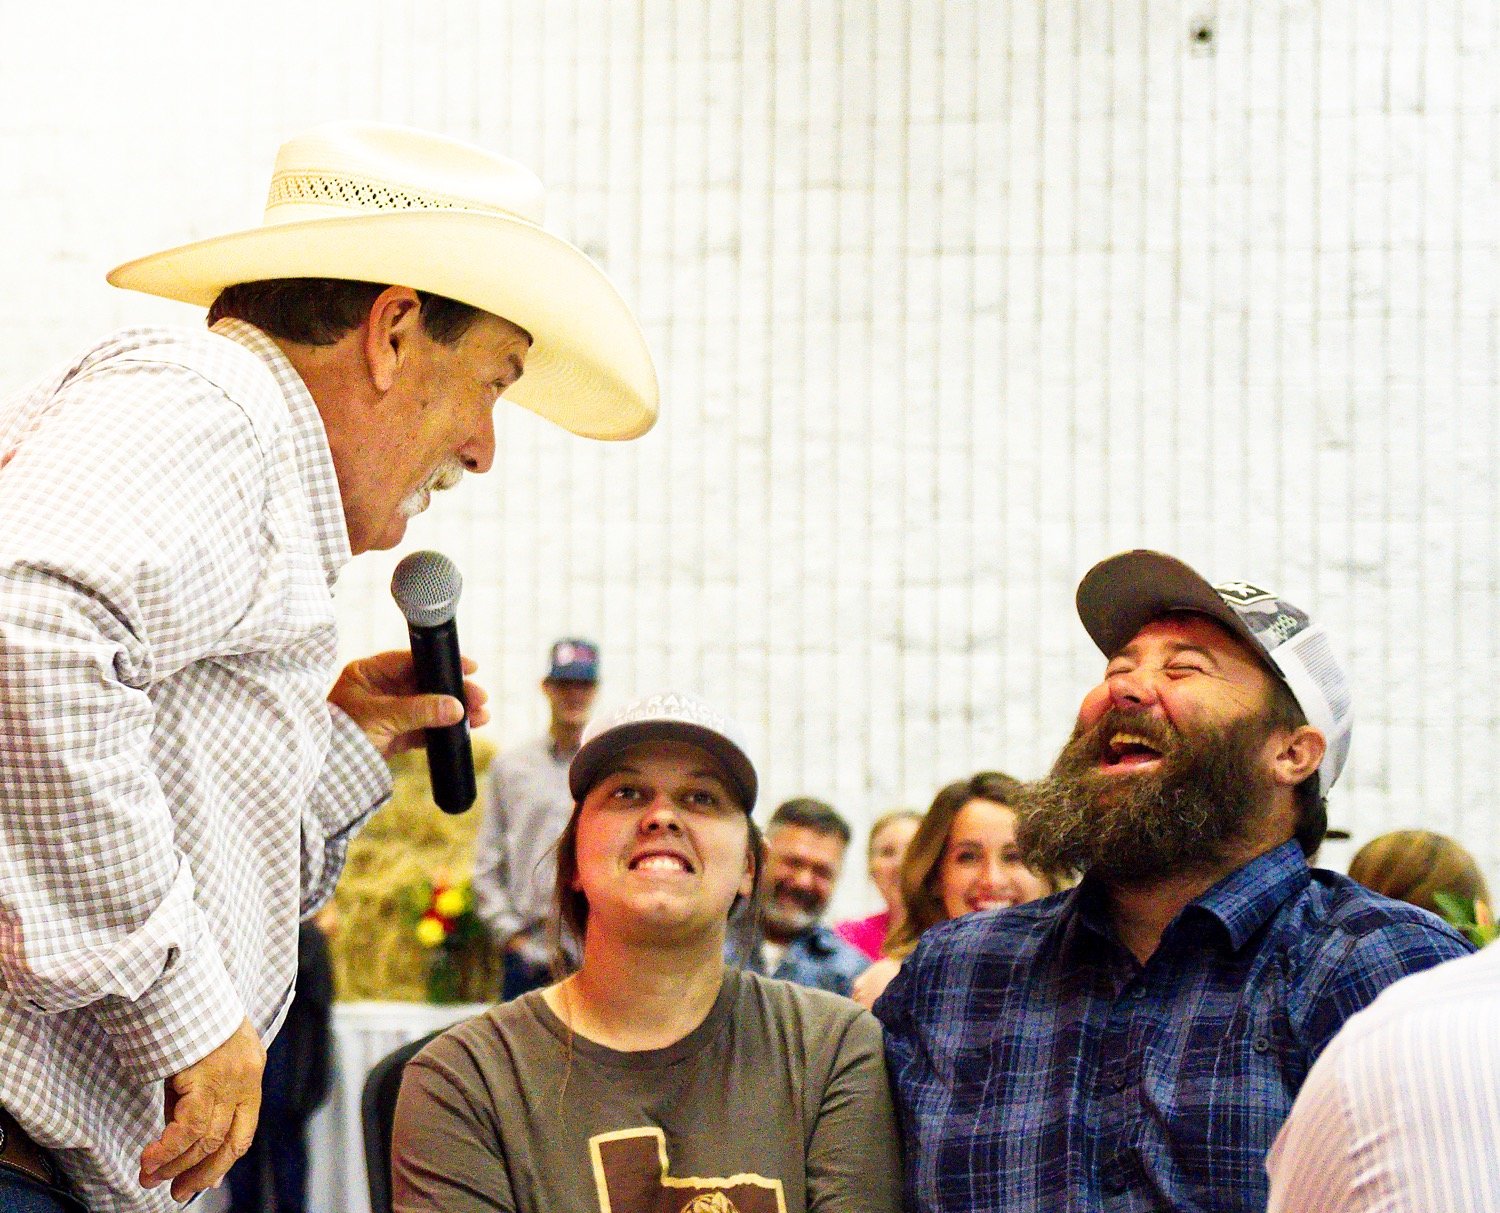 Kelly Conley (left) auctions off the thermal hog hunt offered by Trey Huff (right). [more hay auction action]